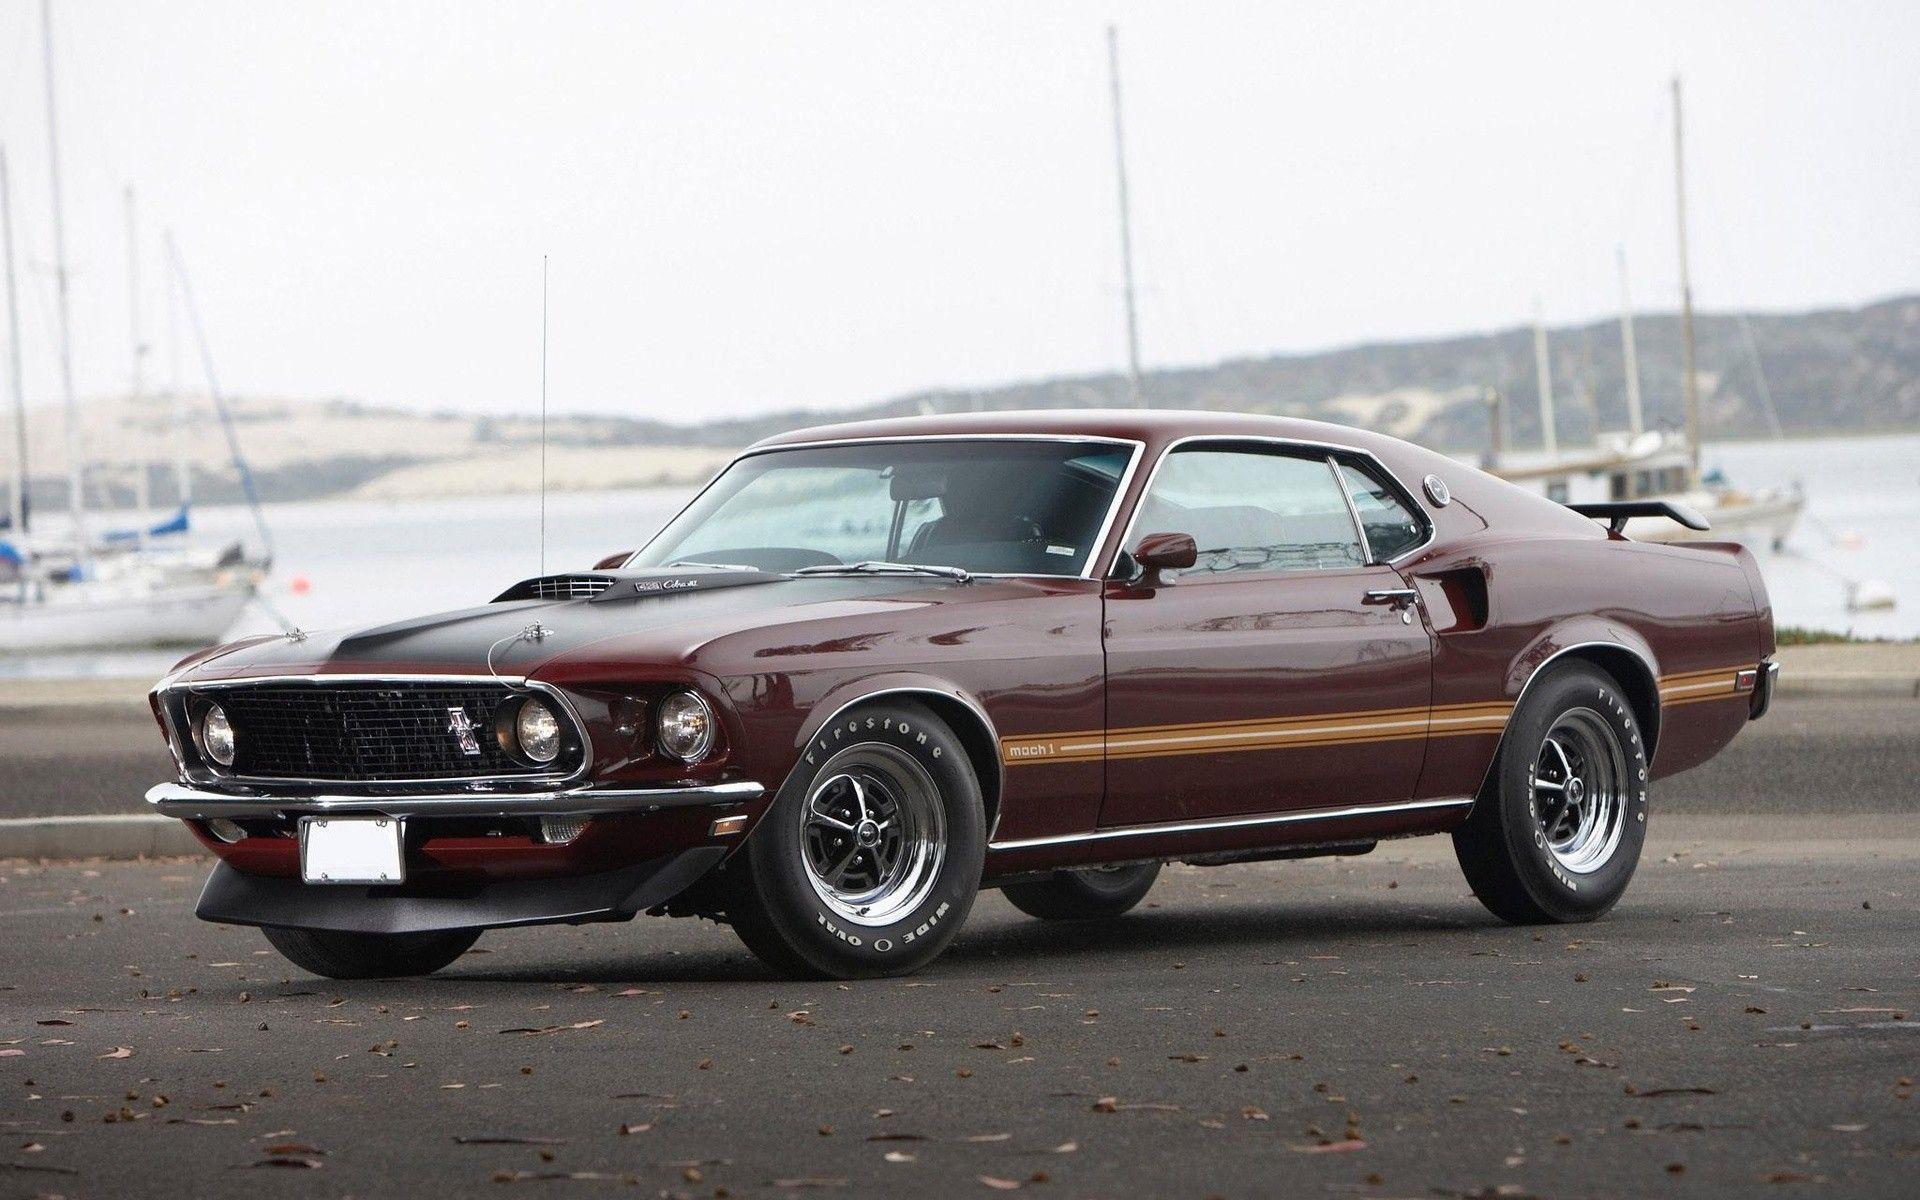 Image for Ford Mustang Mach 1 1969 wallpaper. Autos. Car ford